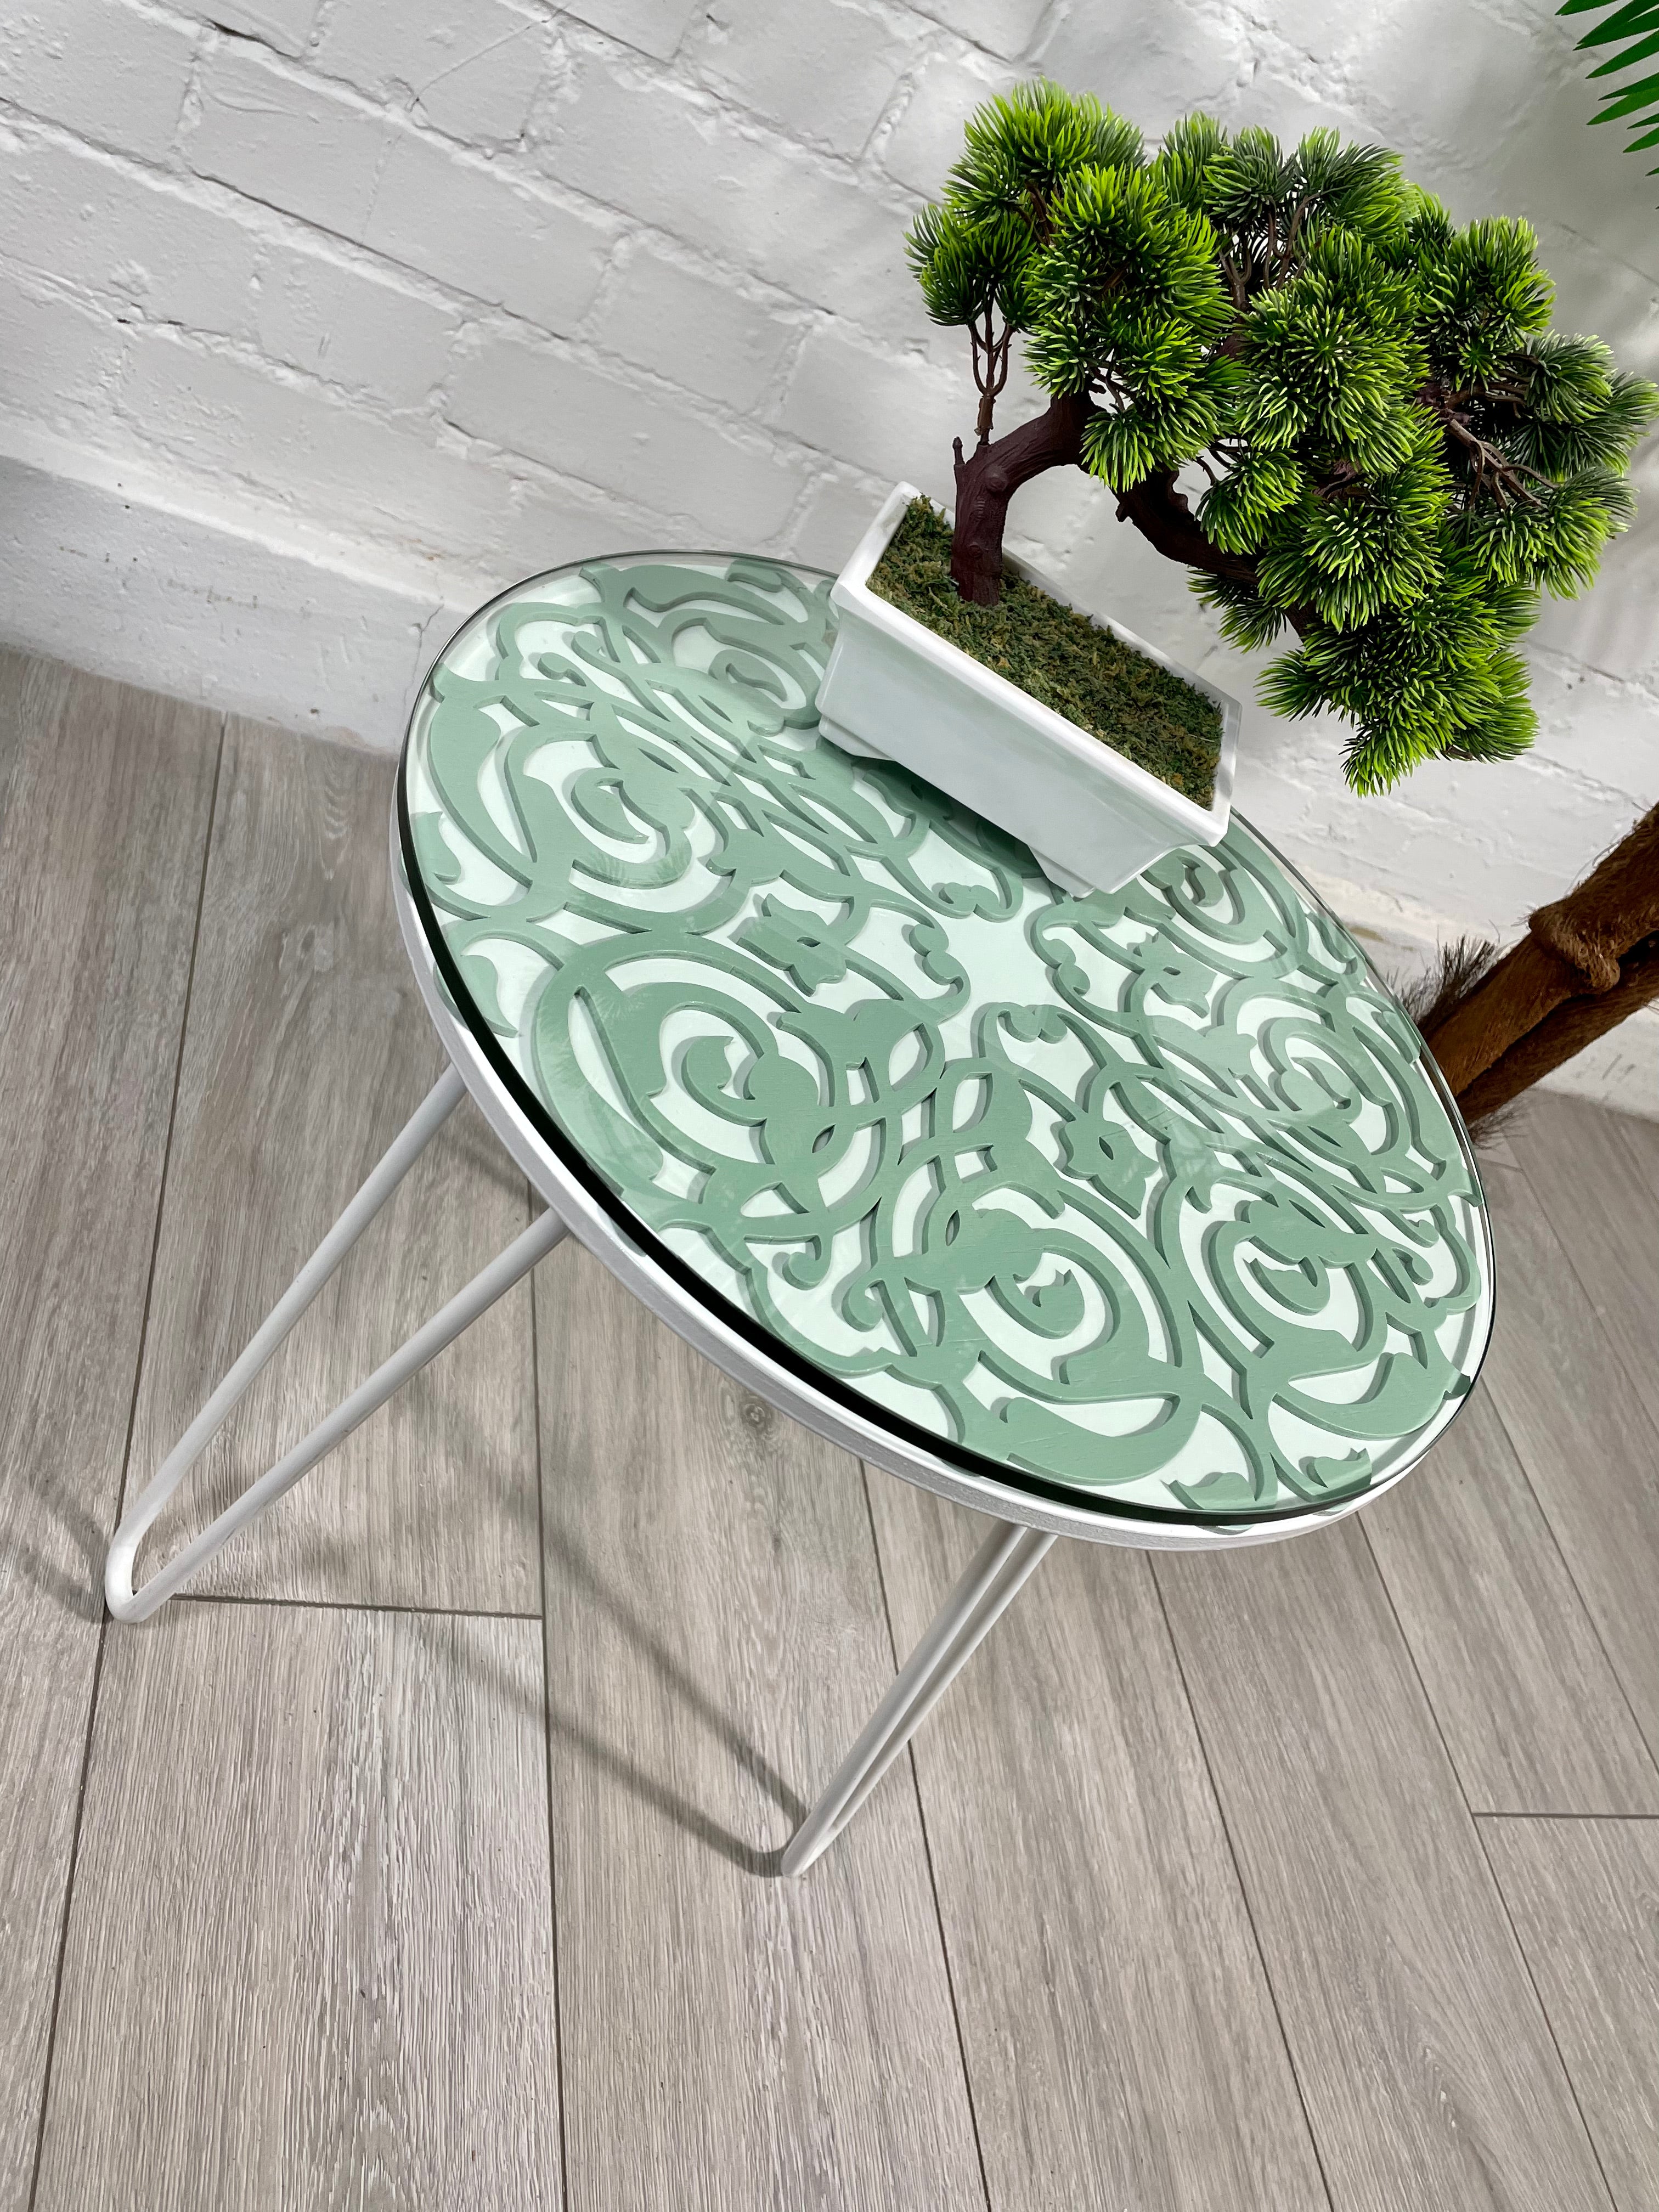 Arabesque Moroccan Side Table in Pastel Green and White Finish Pin Legs Zellige Table Glass Top